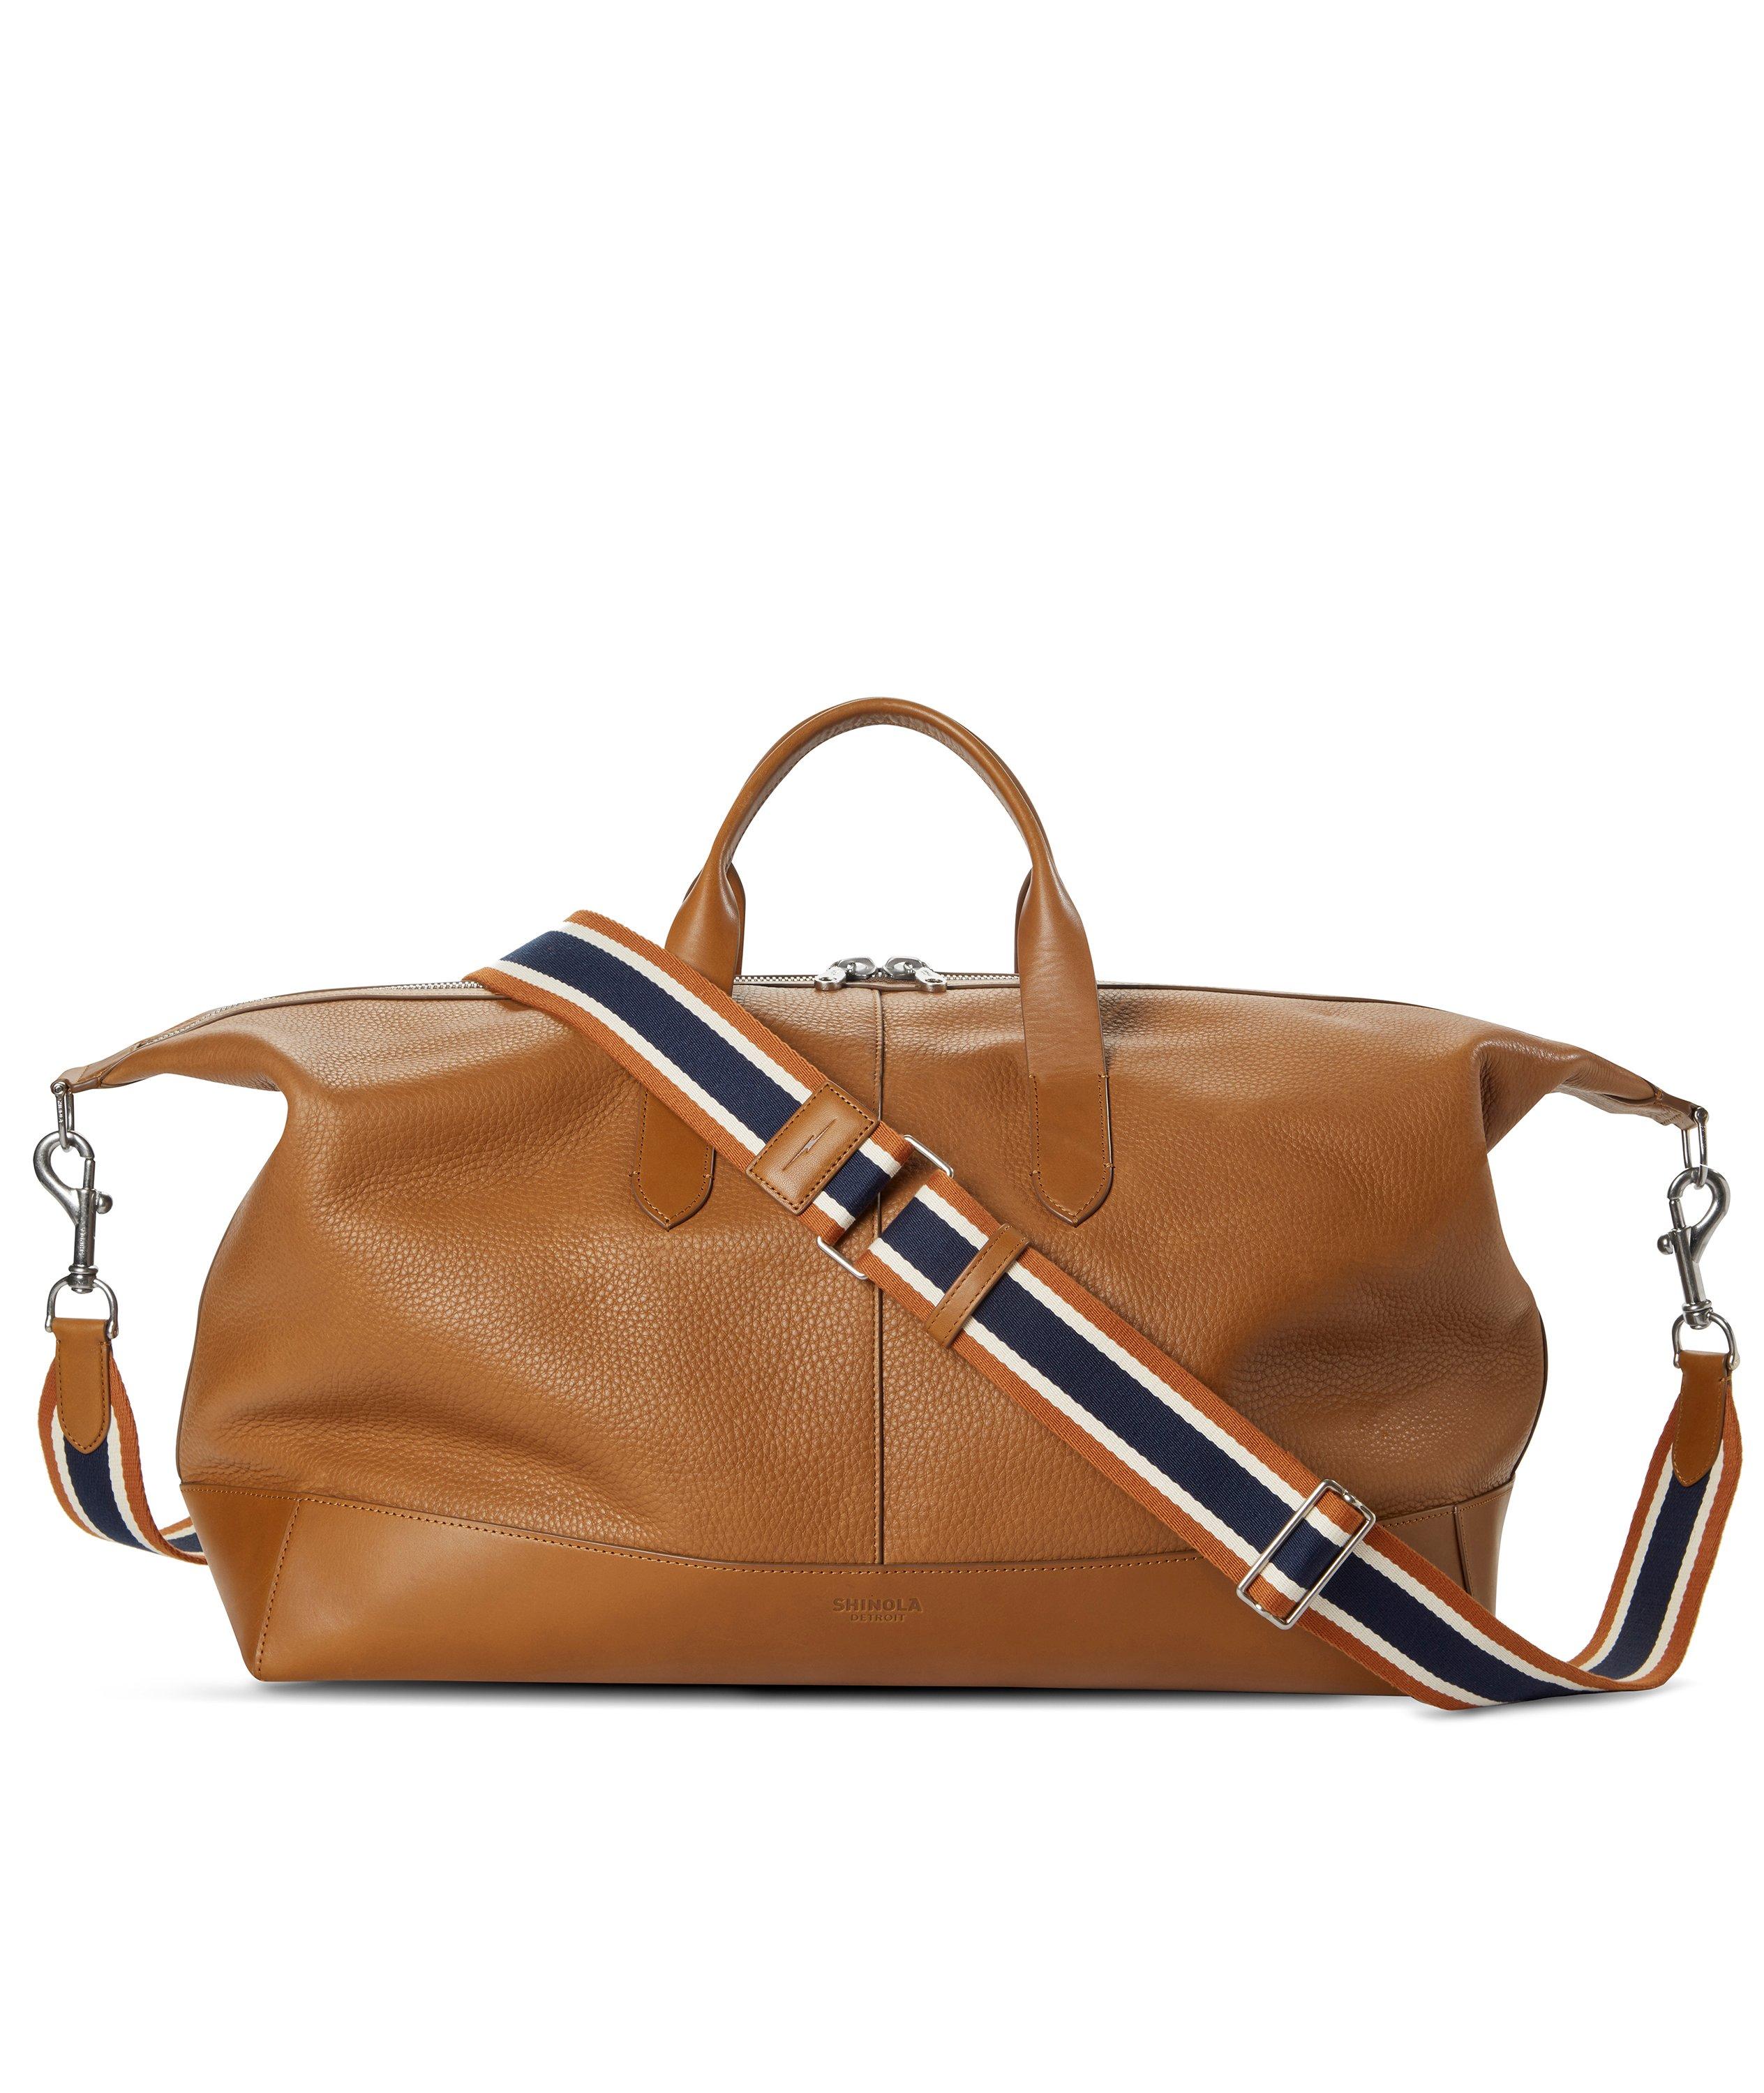 Canfield Classic Holdall Duffle Bag  image 0